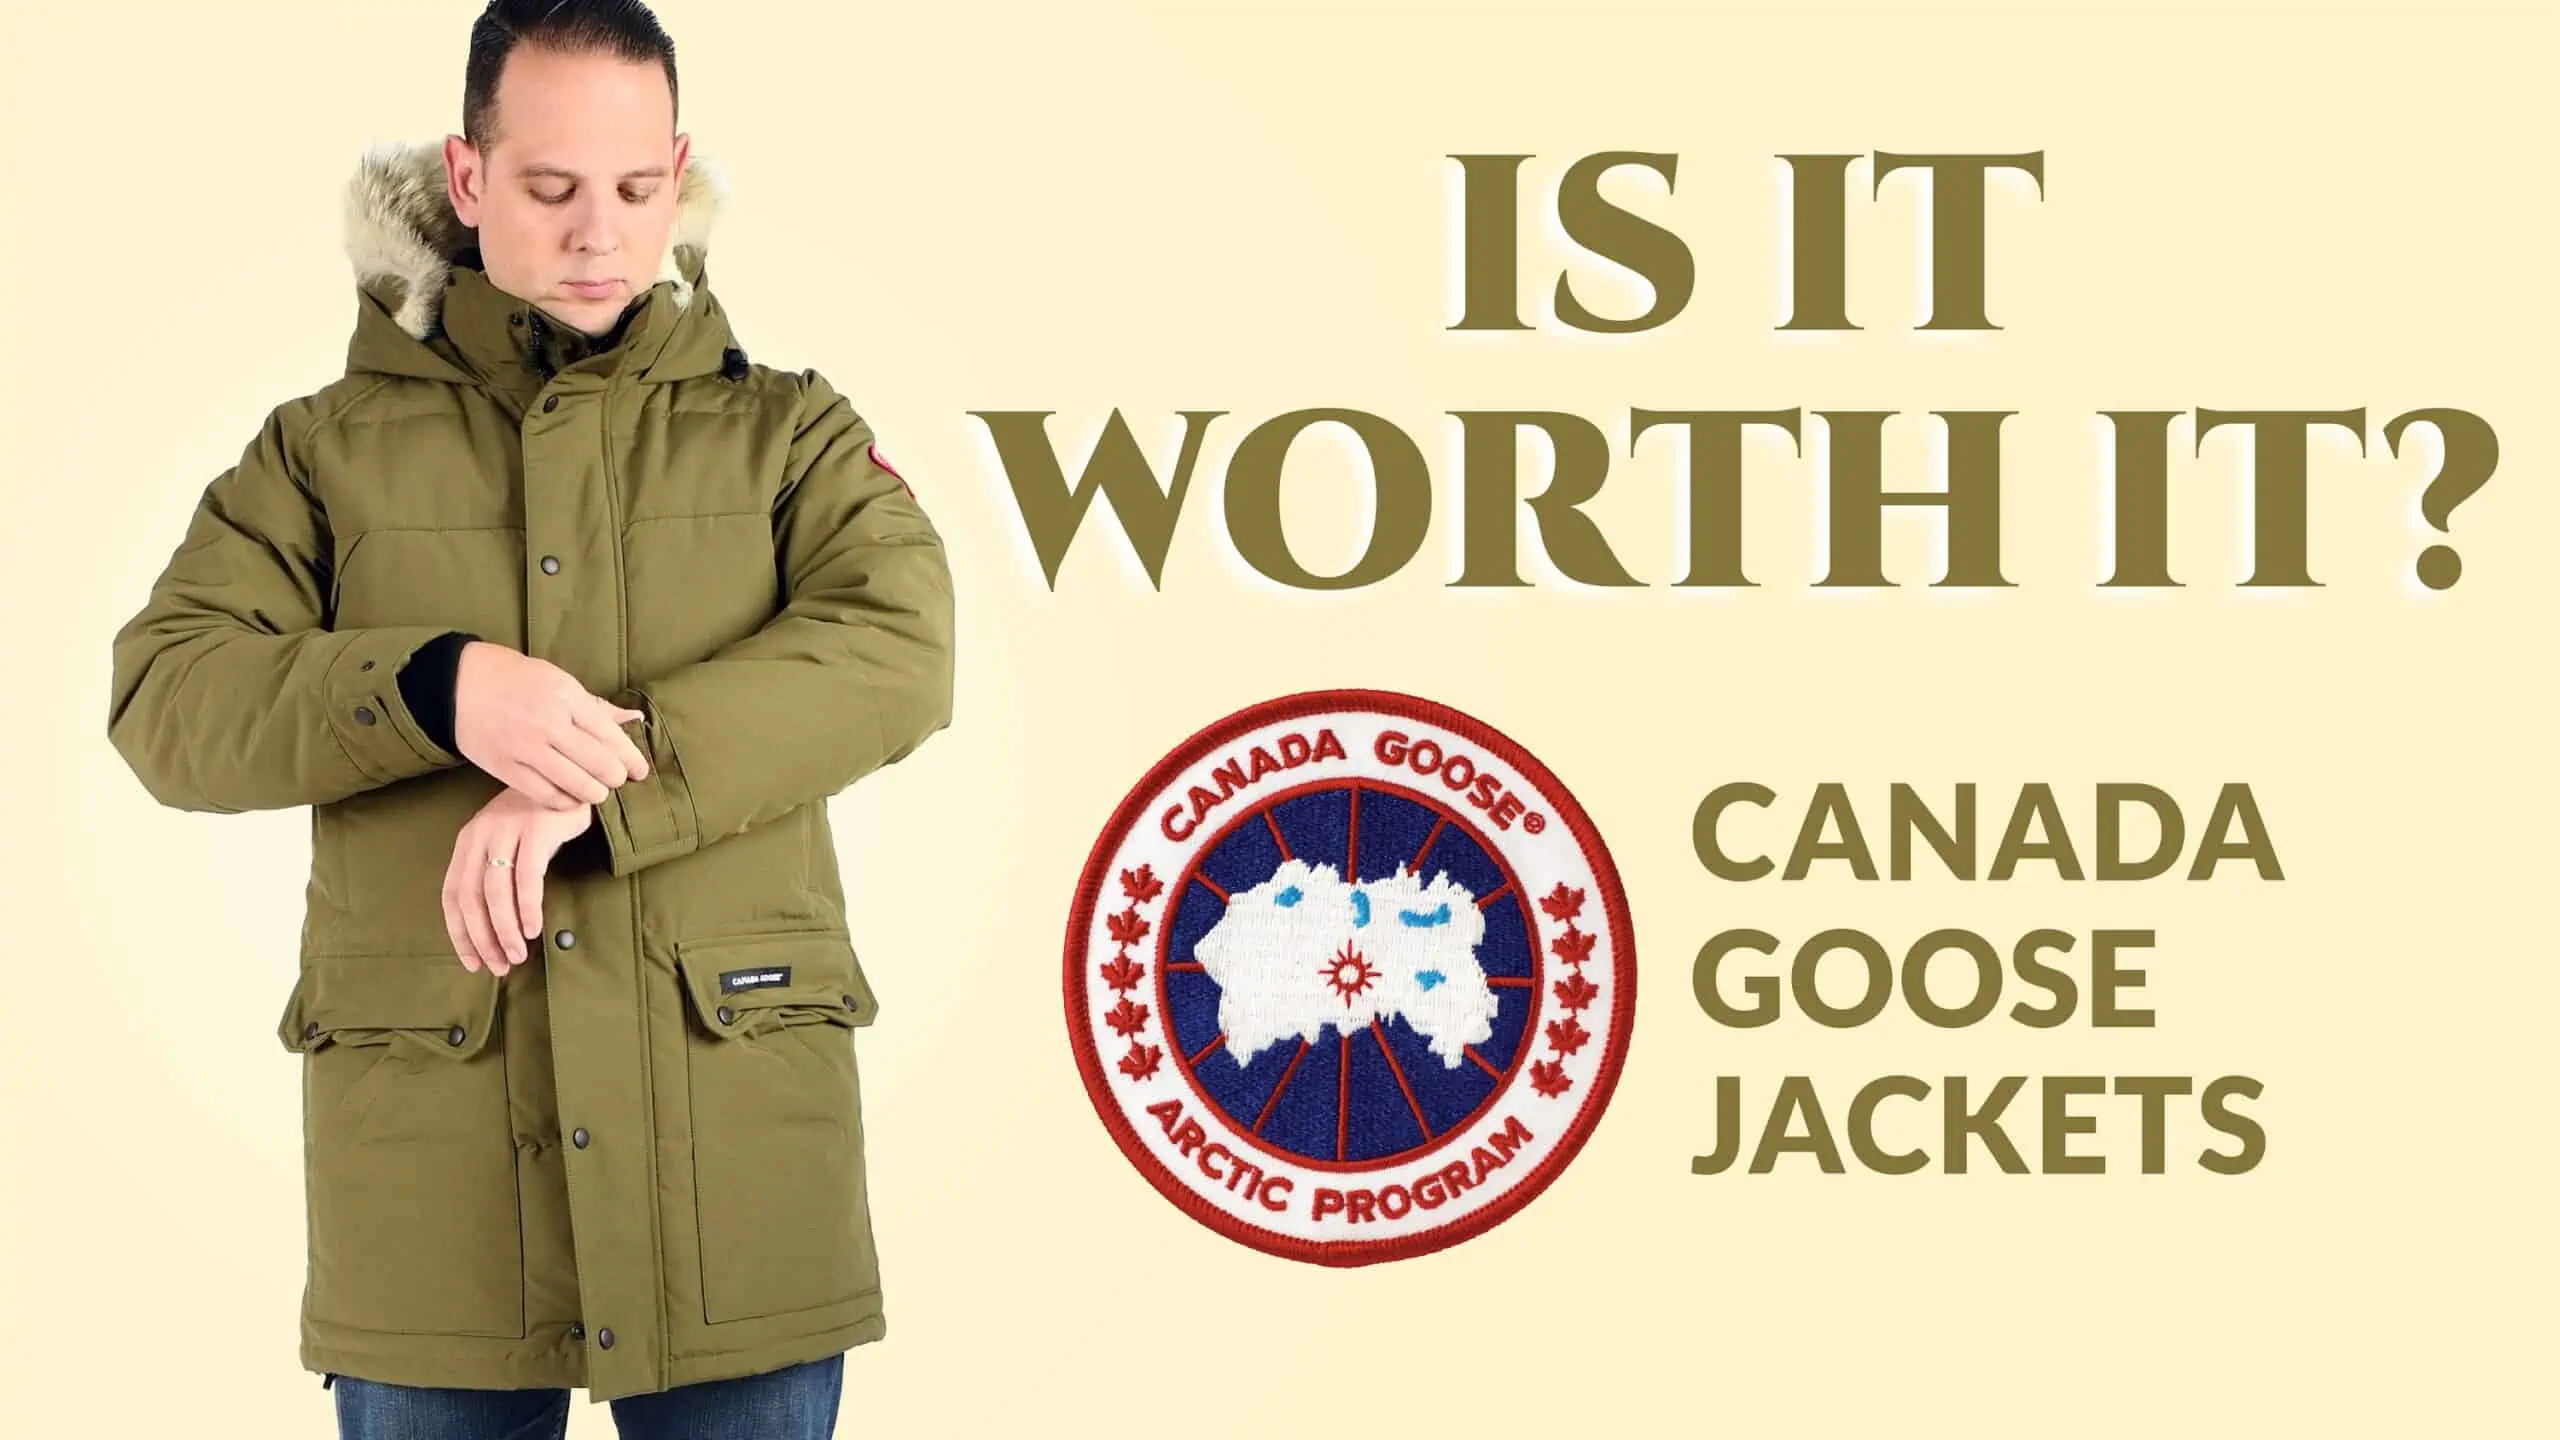 Canada Goose Jackets   Is It Worth It?